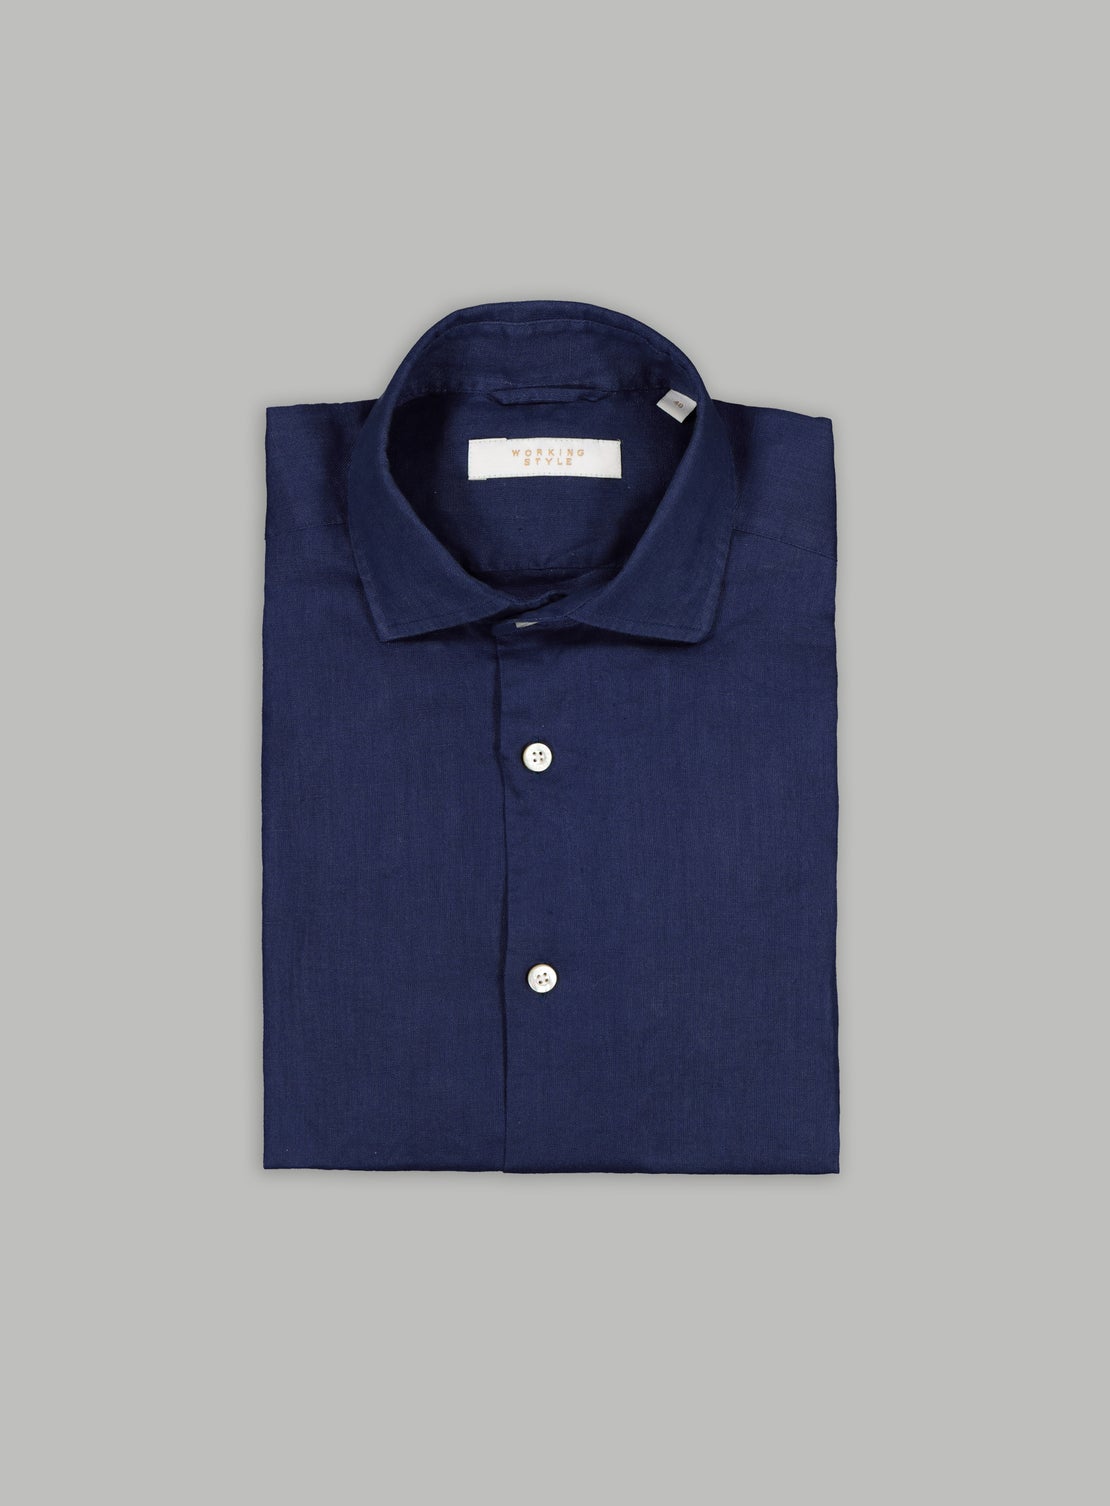 Navy Linen Shirt - Product - Working Style